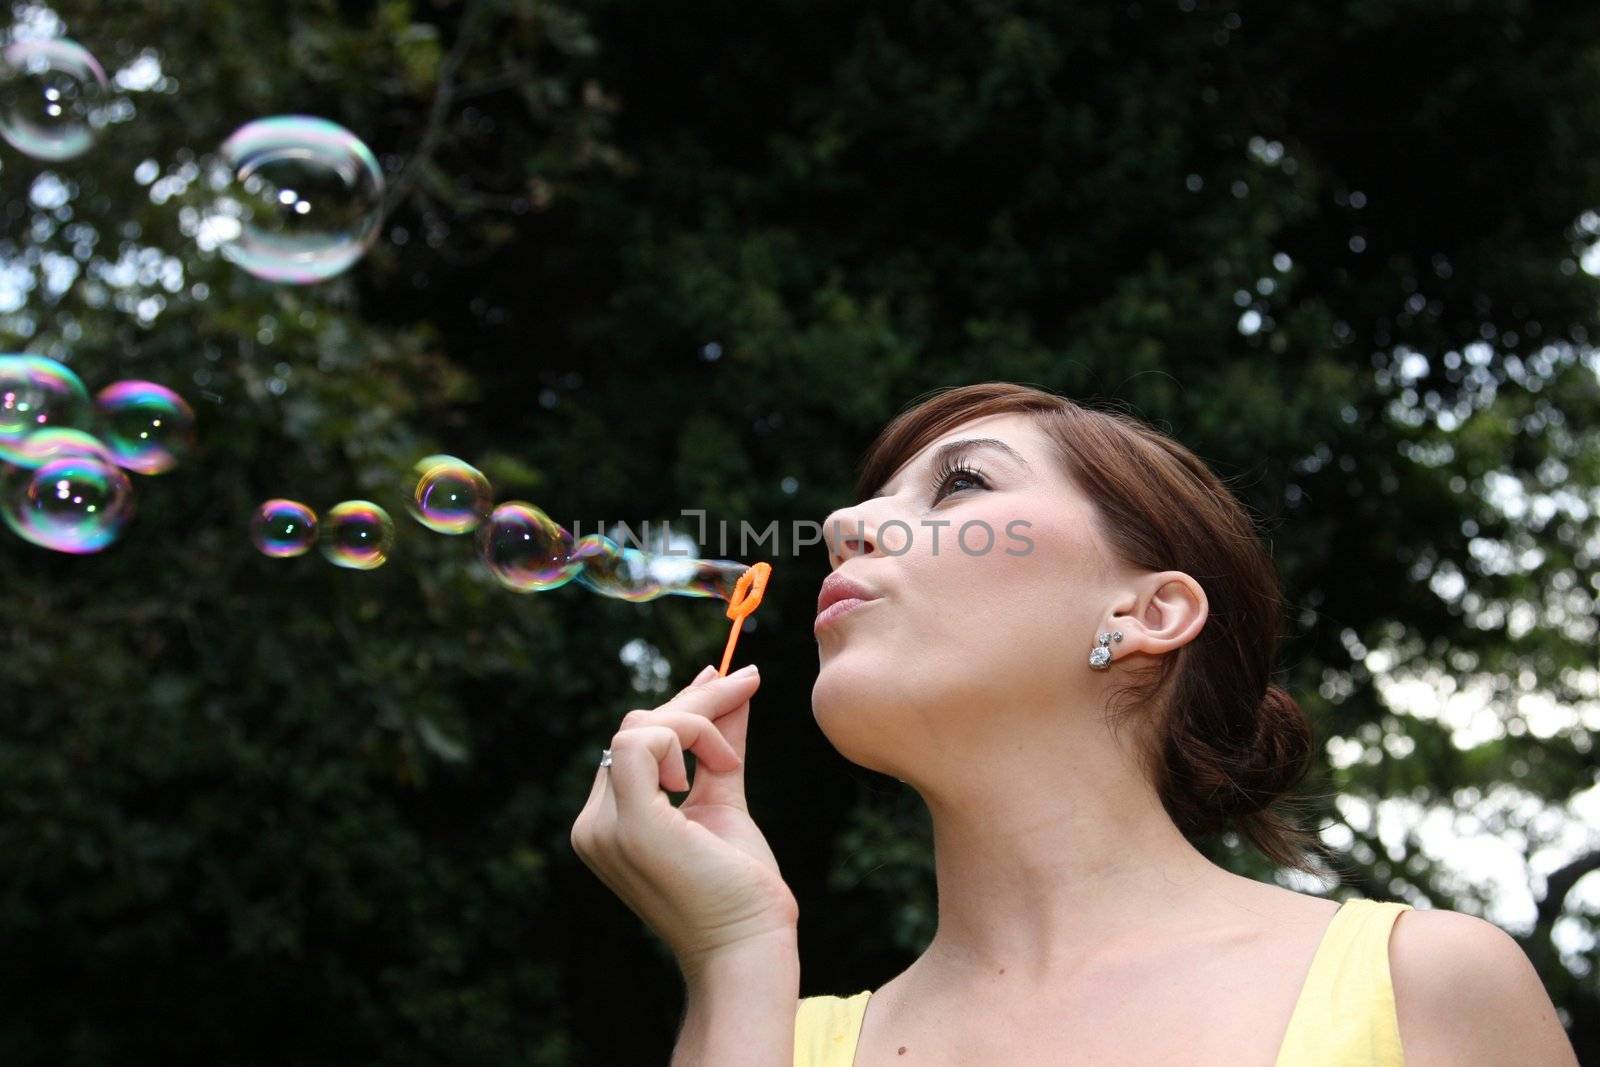 Pretty young woman blowing soap bubbles outdoors